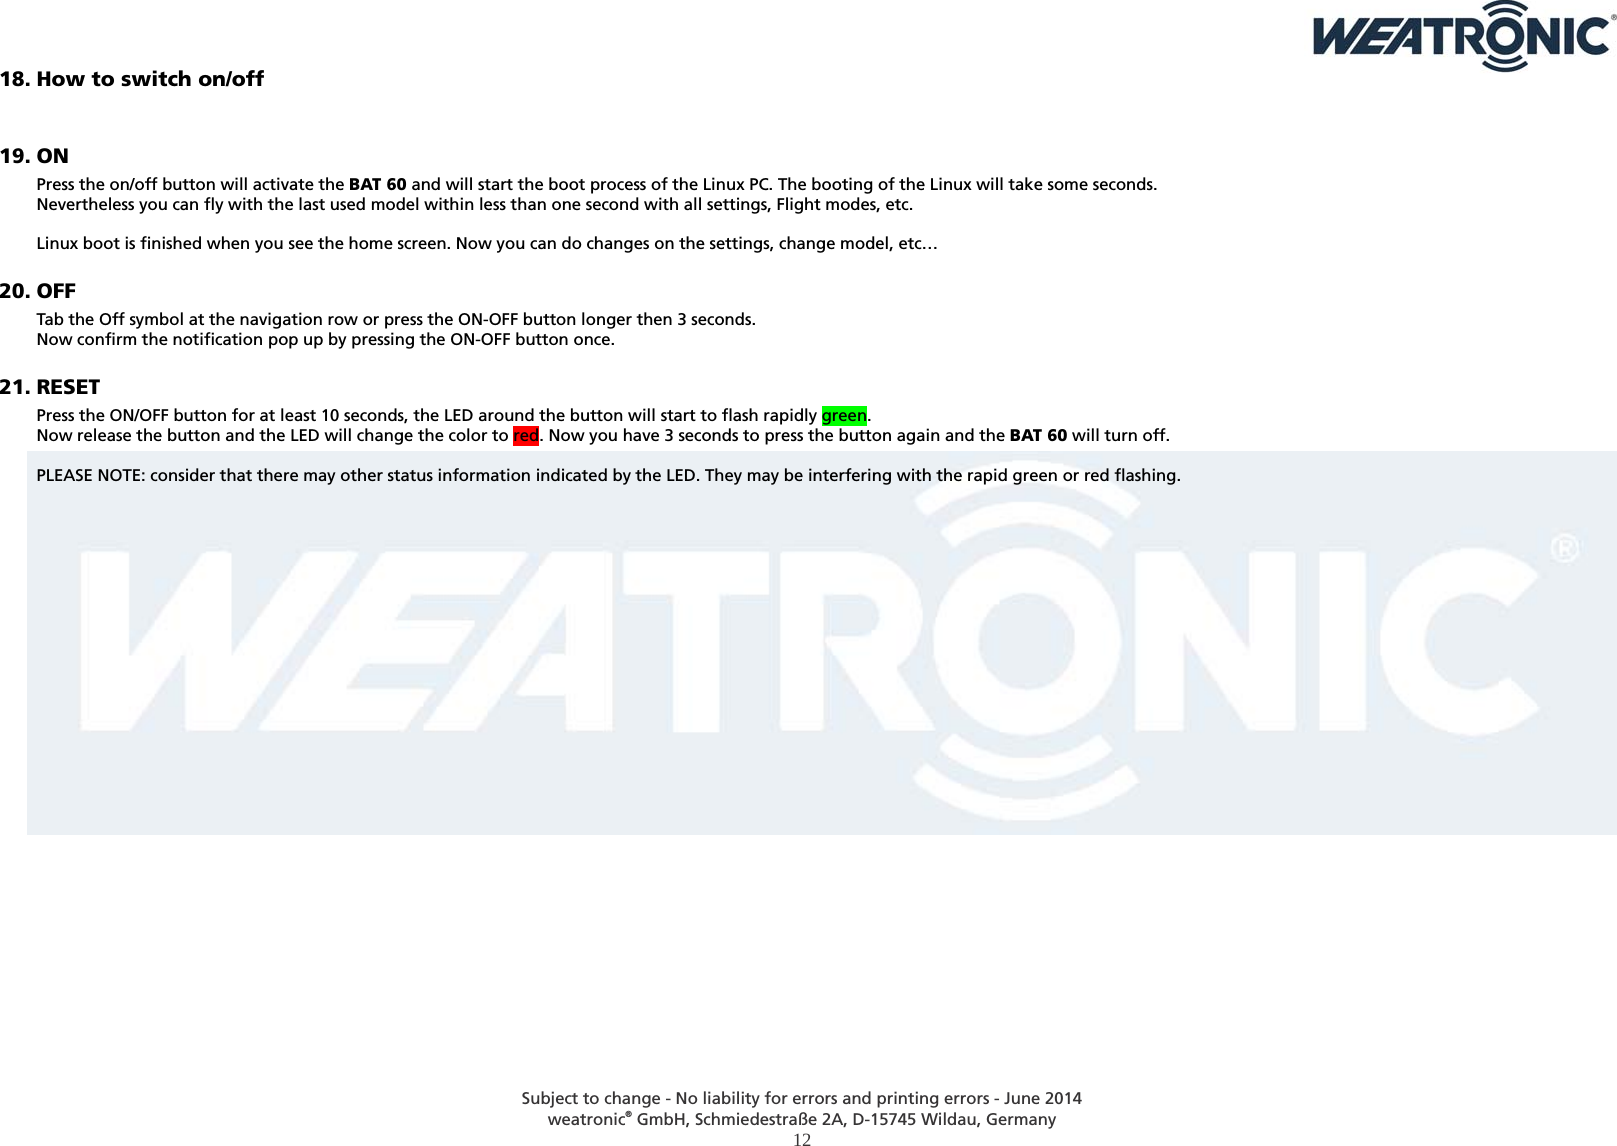  Subject to change - No liability for errors and printing errors - June 2014 weatronic® GmbH, Schmiedestraße 2A, D-15745 Wildau, Germany  12 18. How to switch on/off   19. ON Press the on/off button will activate the BAT 60 and will start the boot process of the Linux PC. The booting of the Linux will take some seconds.  Nevertheless you can fly with the last used model within less than one second with all settings, Flight modes, etc.  Linux boot is finished when you see the home screen. Now you can do changes on the settings, change model, etc… 20. OFF Tab the Off symbol at the navigation row or press the ON-OFF button longer then 3 seconds.  Now confirm the notification pop up by pressing the ON-OFF button once. 21. RESET Press the ON/OFF button for at least 10 seconds, the LED around the button will start to flash rapidly green. Now release the button and the LED will change the color to red. Now you have 3 seconds to press the button again and the BAT 60 will turn off.  PLEASE NOTE: consider that there may other status information indicated by the LED. They may be interfering with the rapid green or red flashing.  